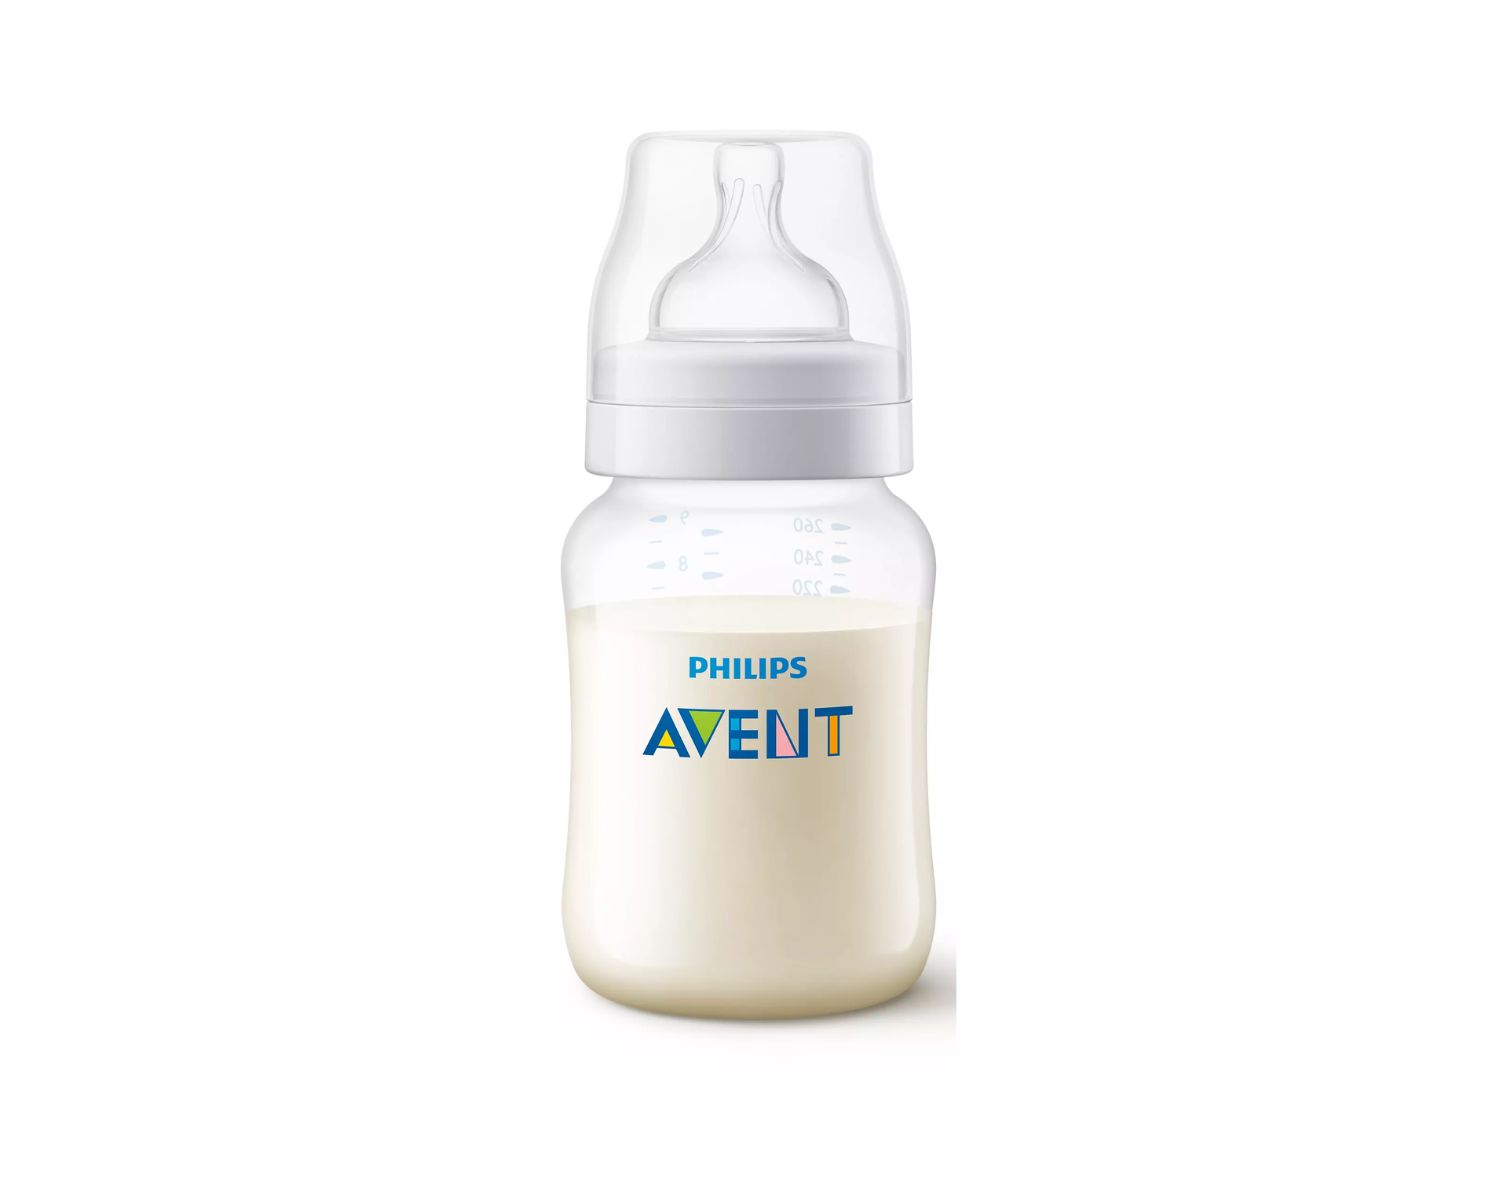 Top Baby Bottle Reviews: Find the Perfect Choice for Your Little One